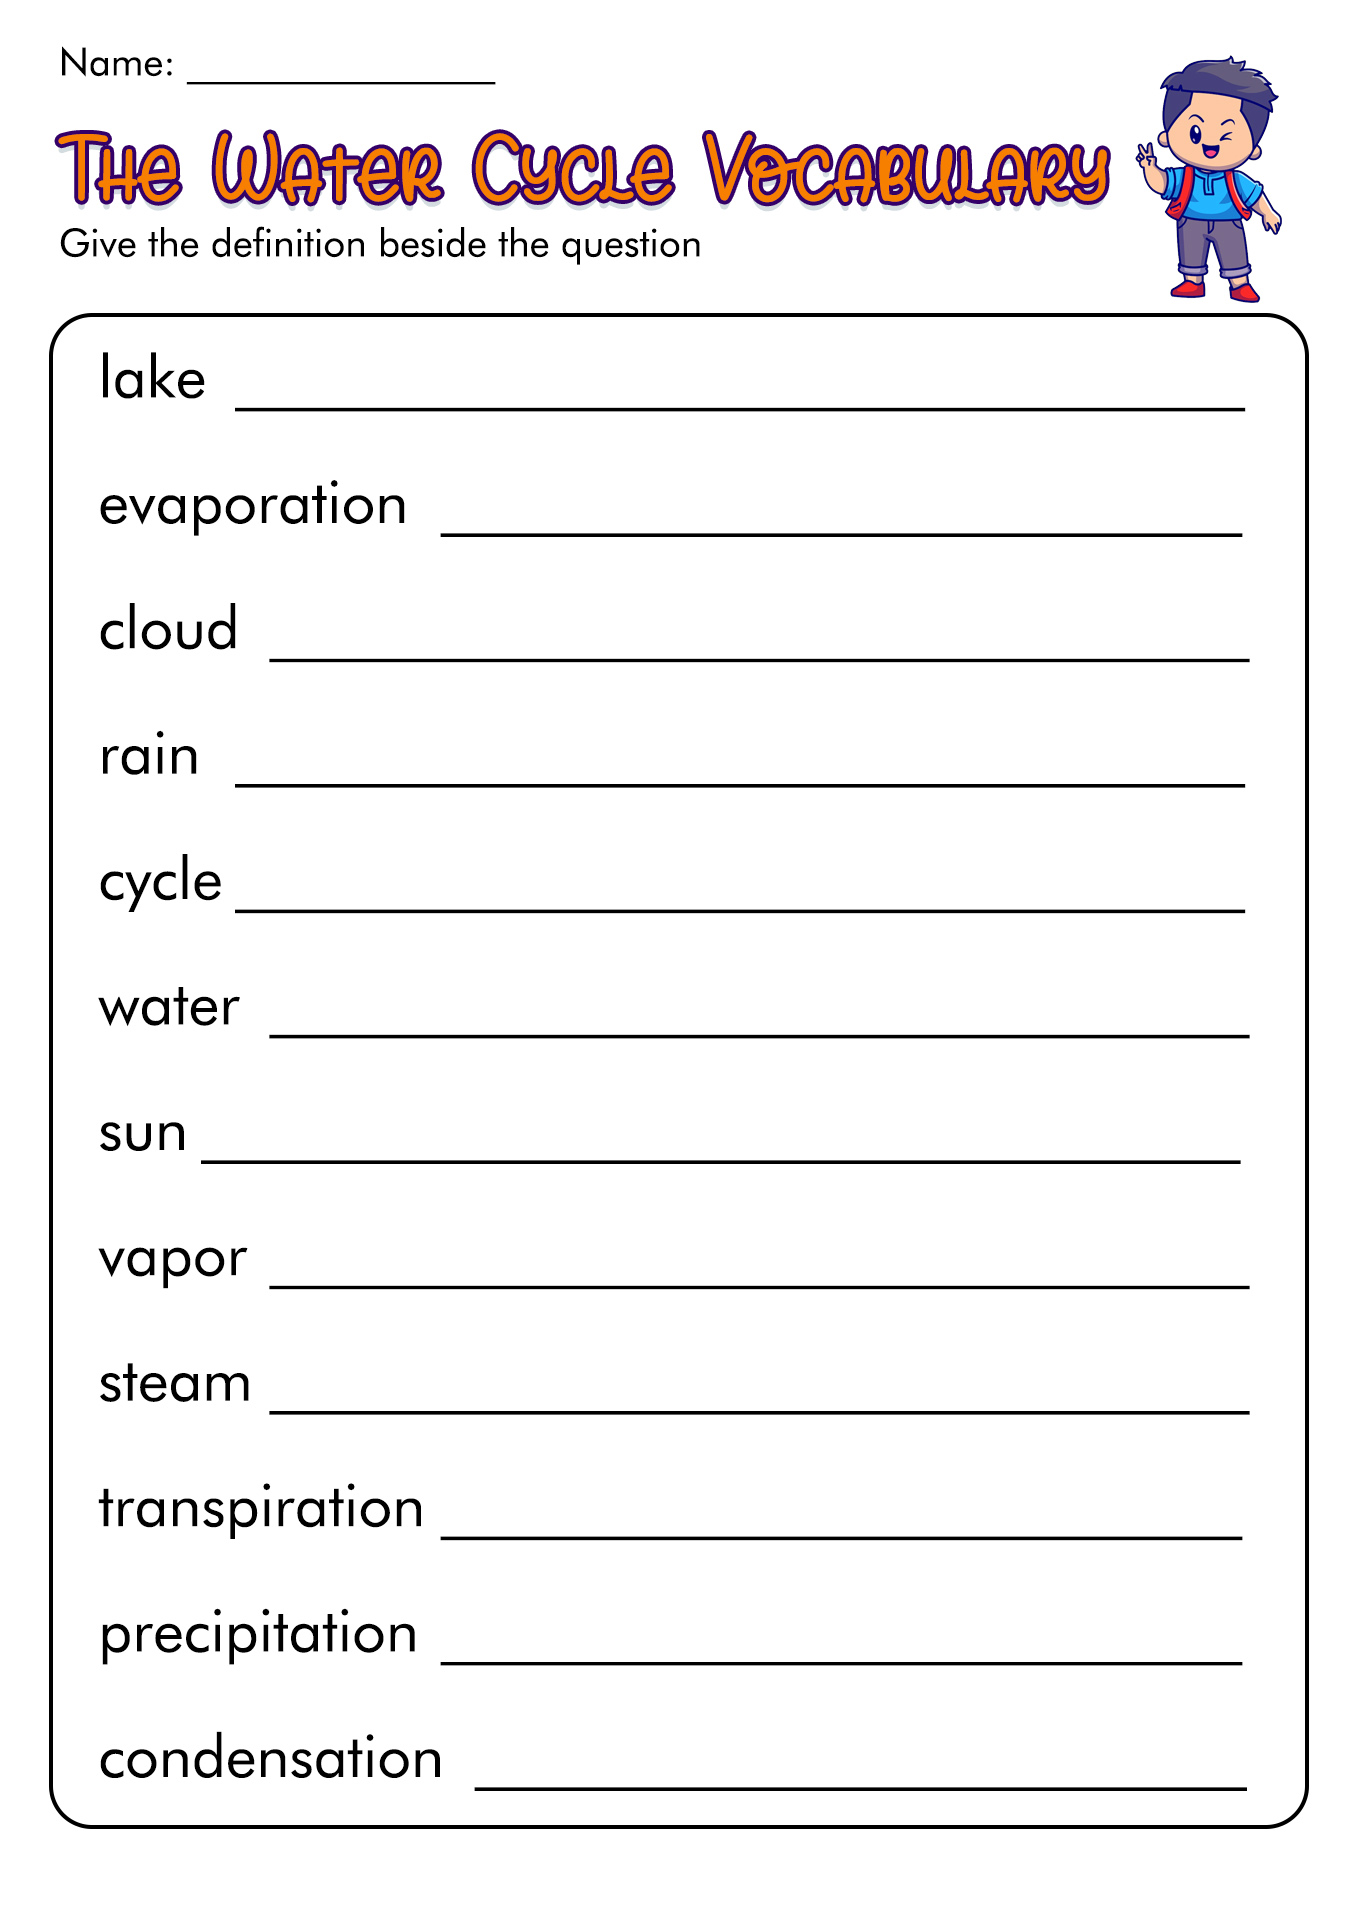 Water Cycle Vocabulary Worksheet Image